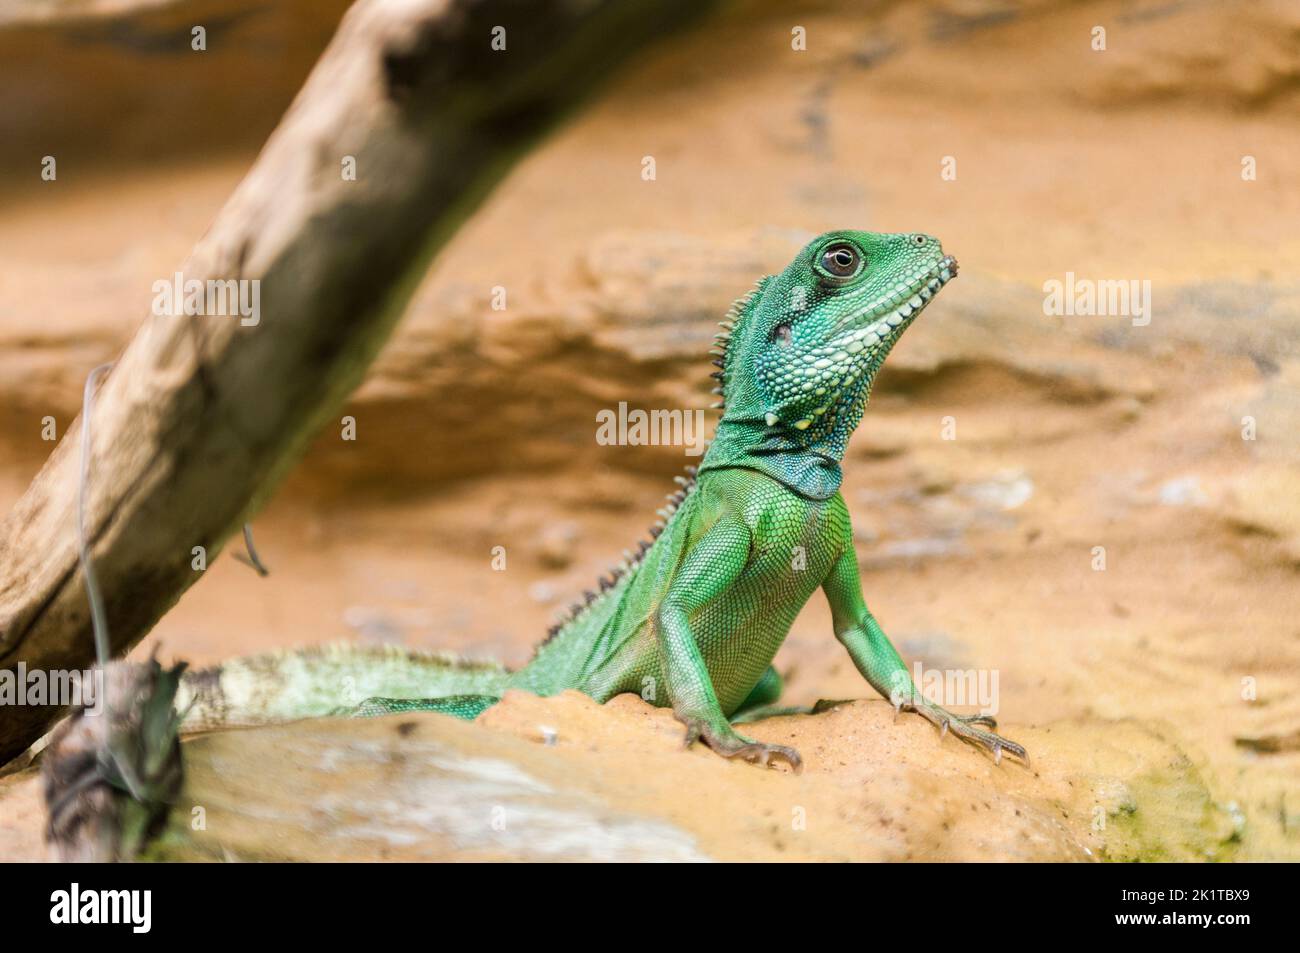 Three-quarter view of a single Green Water Dragon (lat: Physignathus cocincinus) on loamy soil against a blurred background. Stock Photo